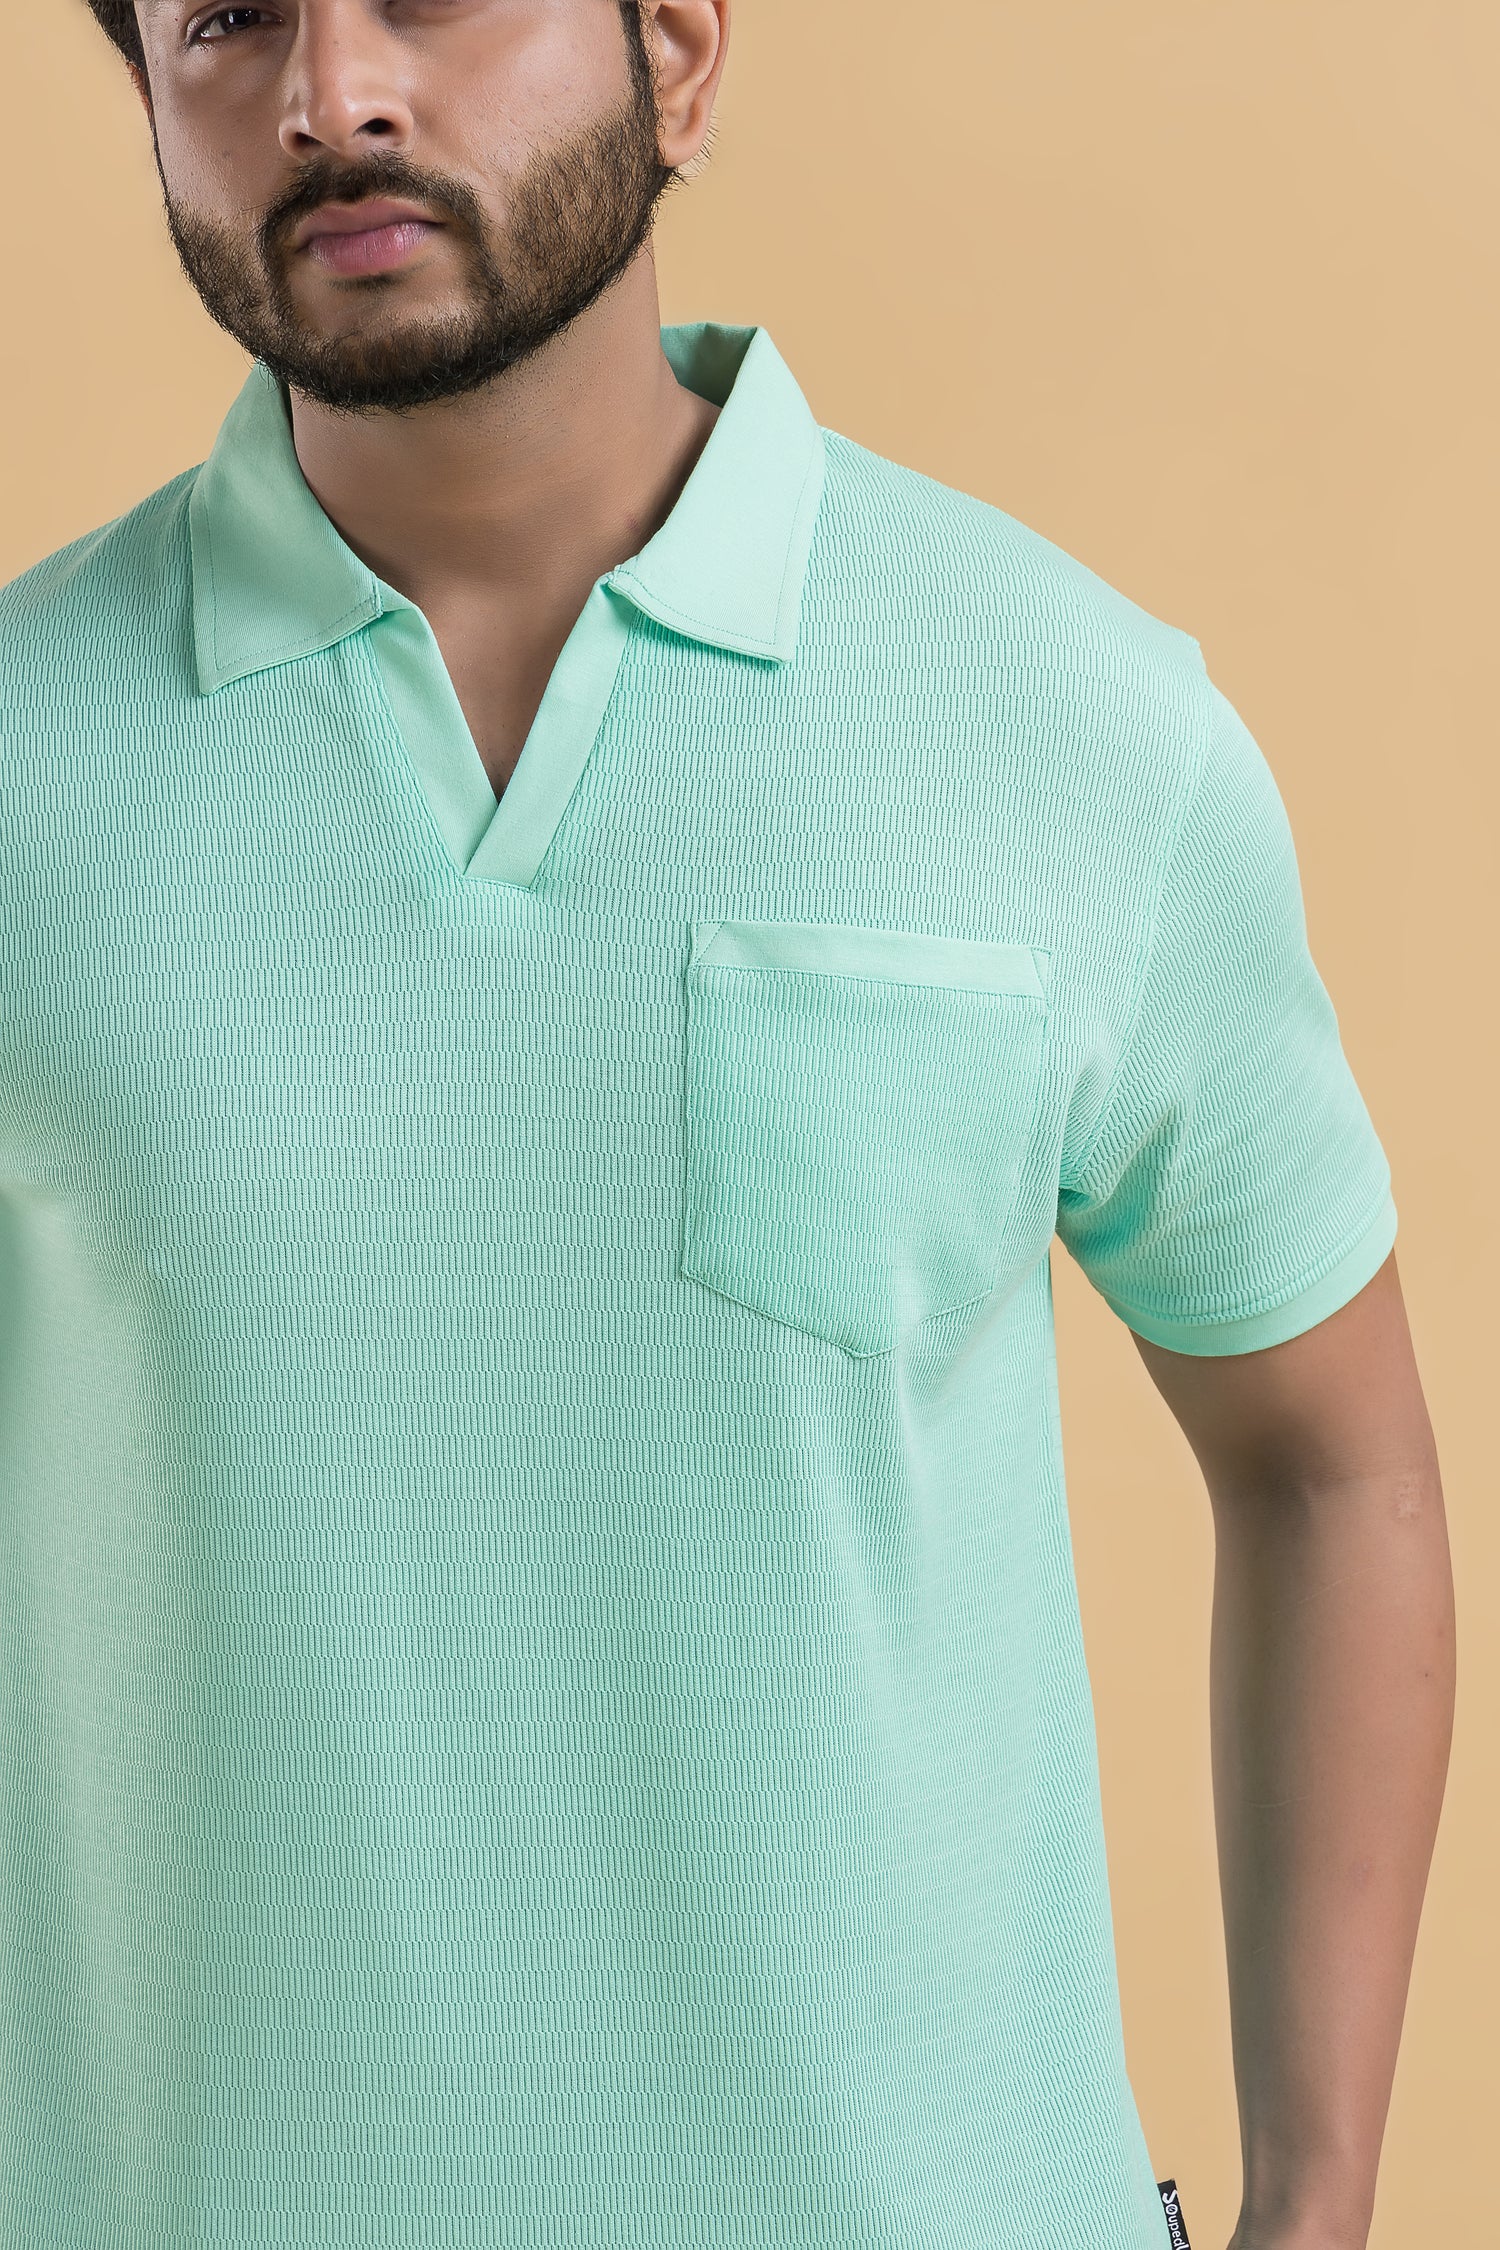 Zephyr Zest Turquoise Half Sleeves Cotton Polo T-Shirt